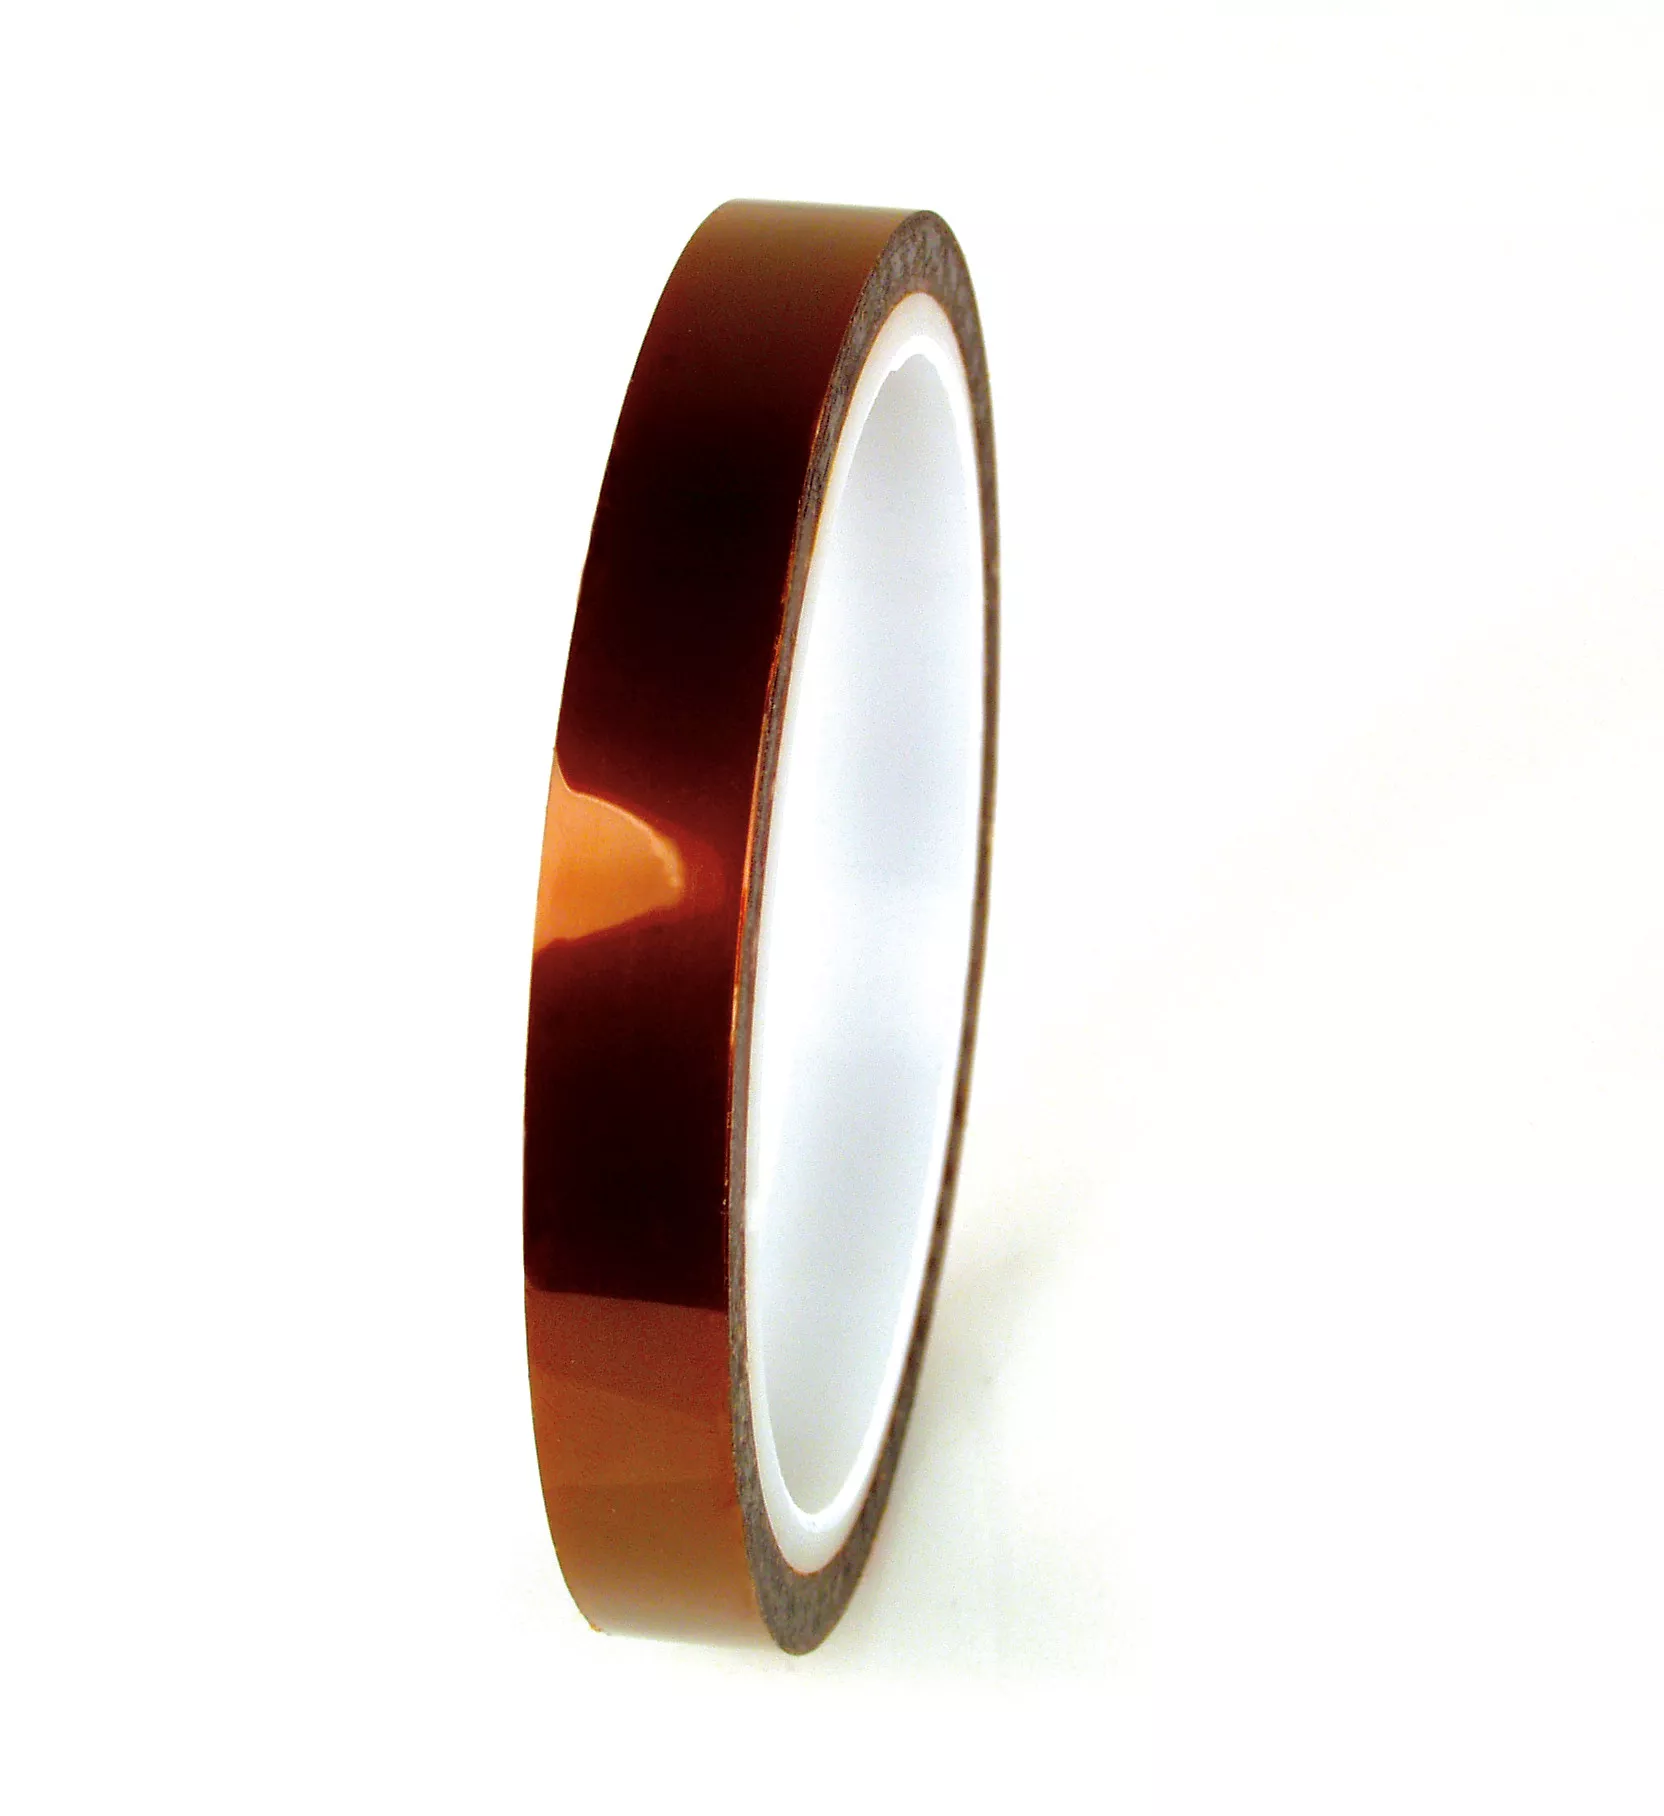 SKU 7010349667 | 3M™ Polyimide Film Electrical Tape 1218